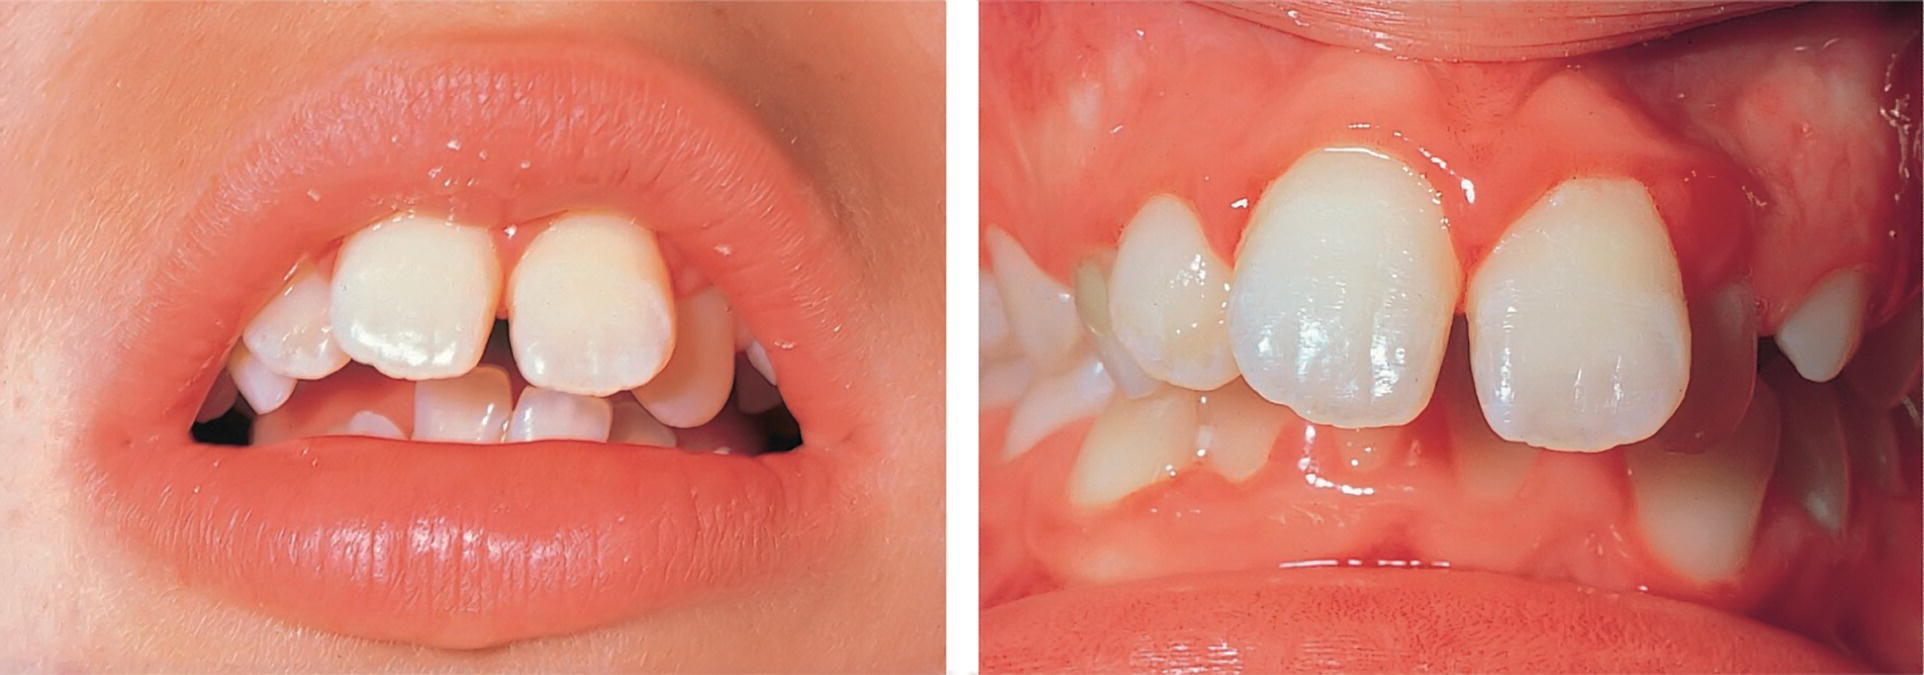 2 Photos of a patient’s mouth (left) and bite (right) displaying chronic gingivitis associated with mouth breathing.